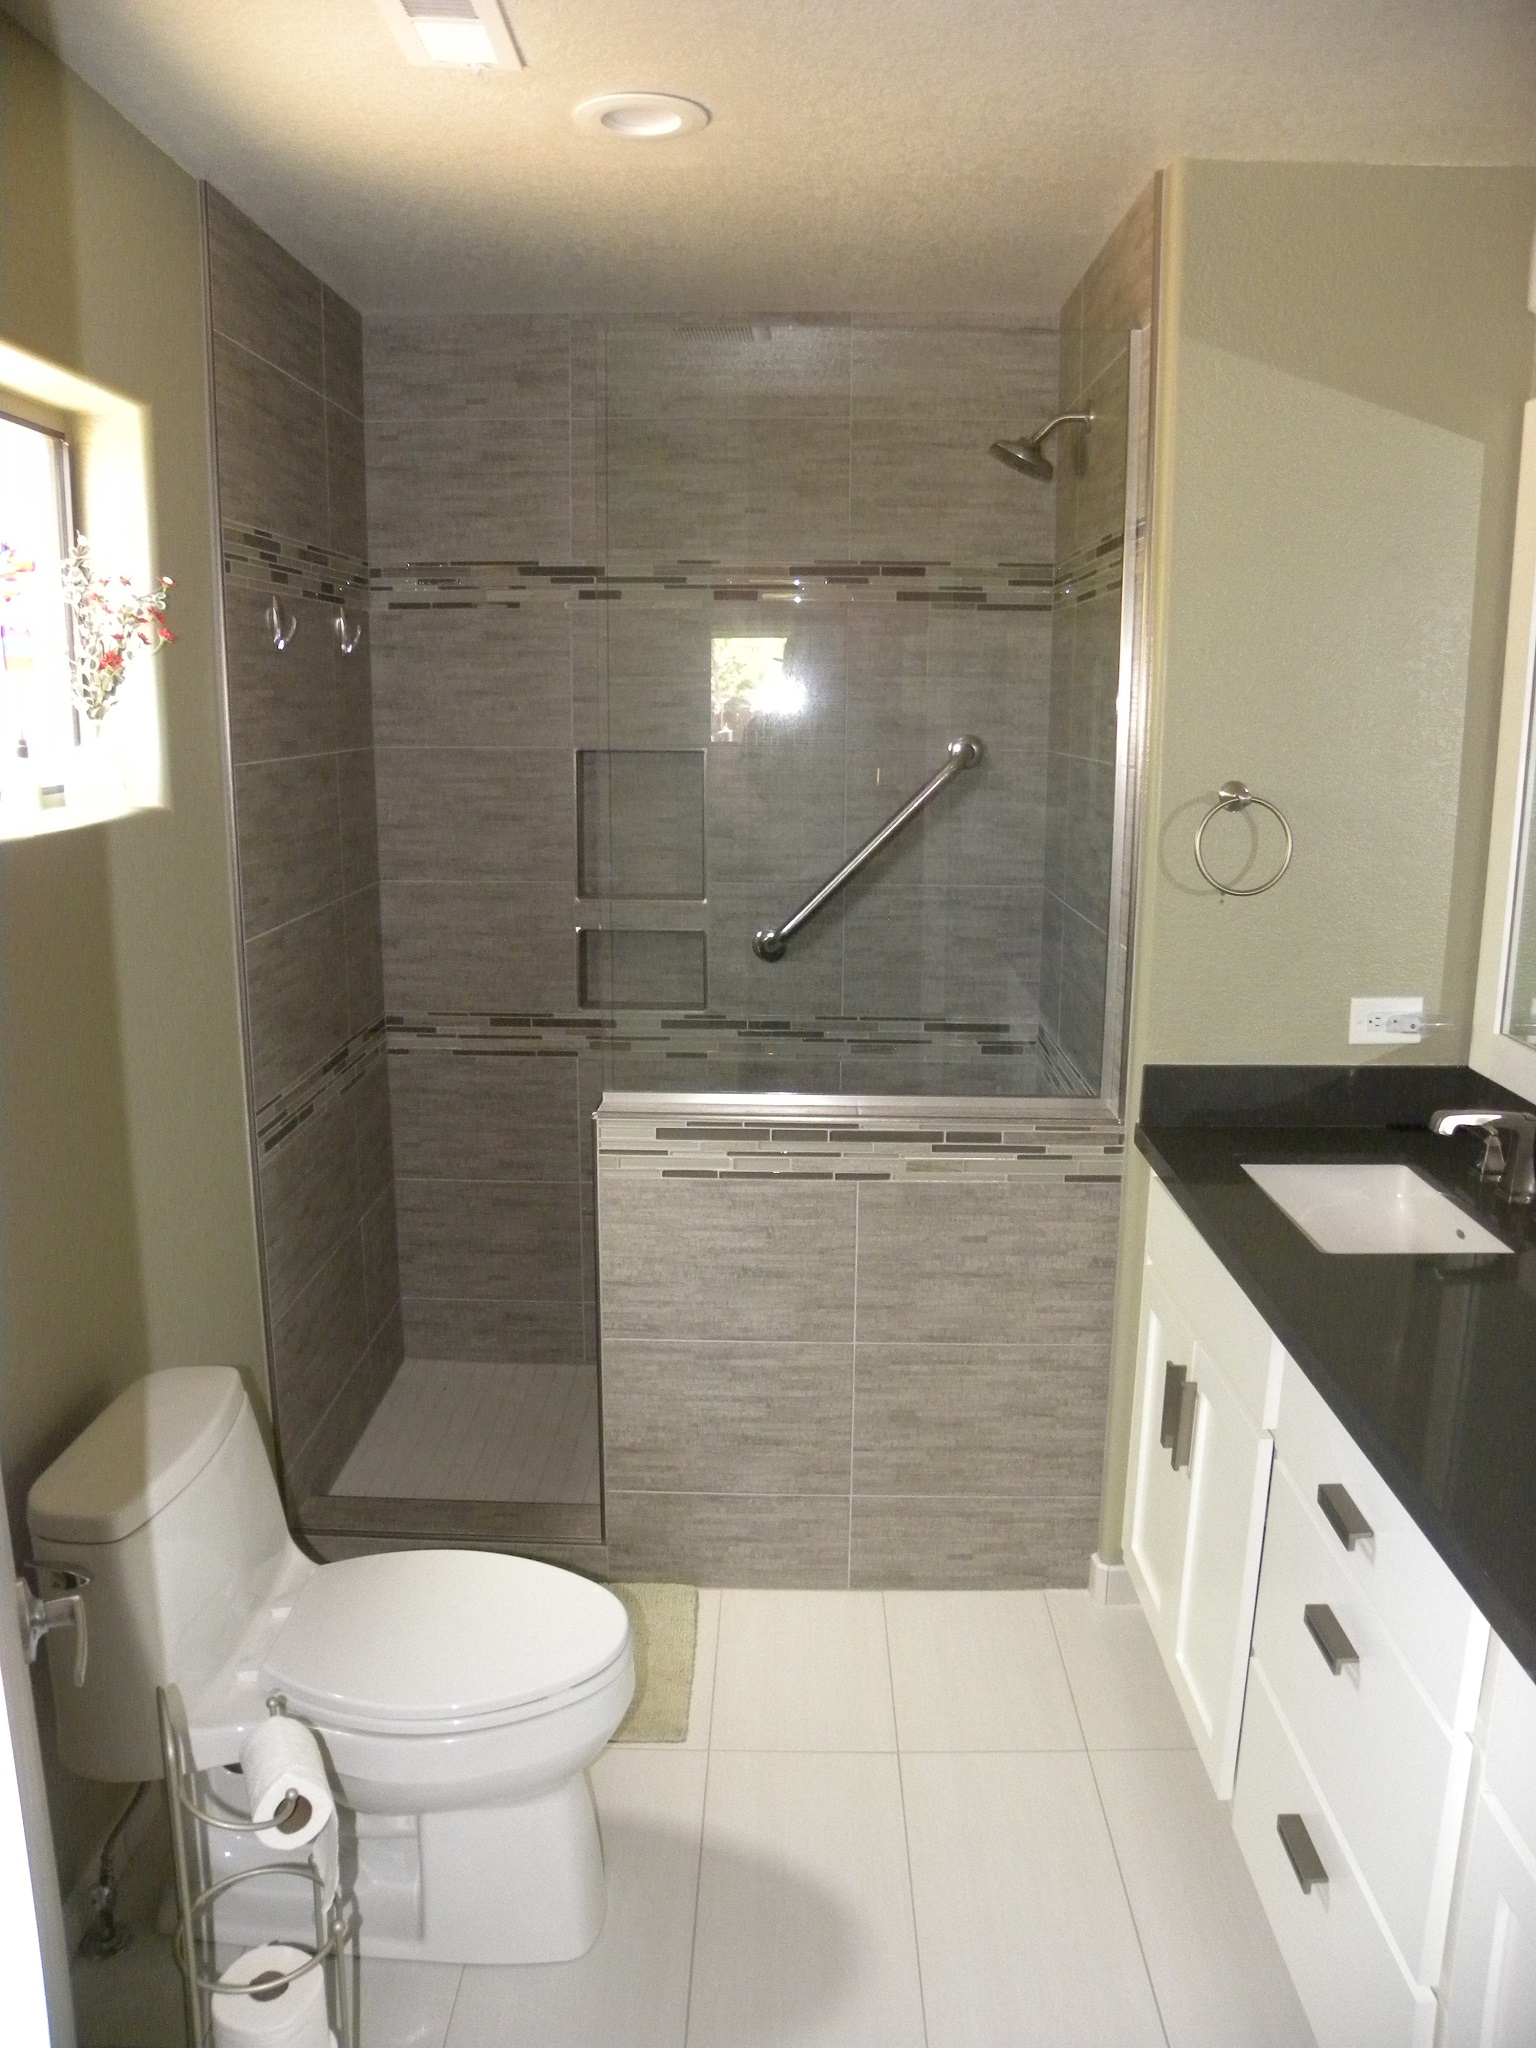 After photo of a custom residential bathroom with black countertops and white wooden cabinets, new white tiles, and a custom designed shower with gray tile, glass windows and doors, and specially design handles.